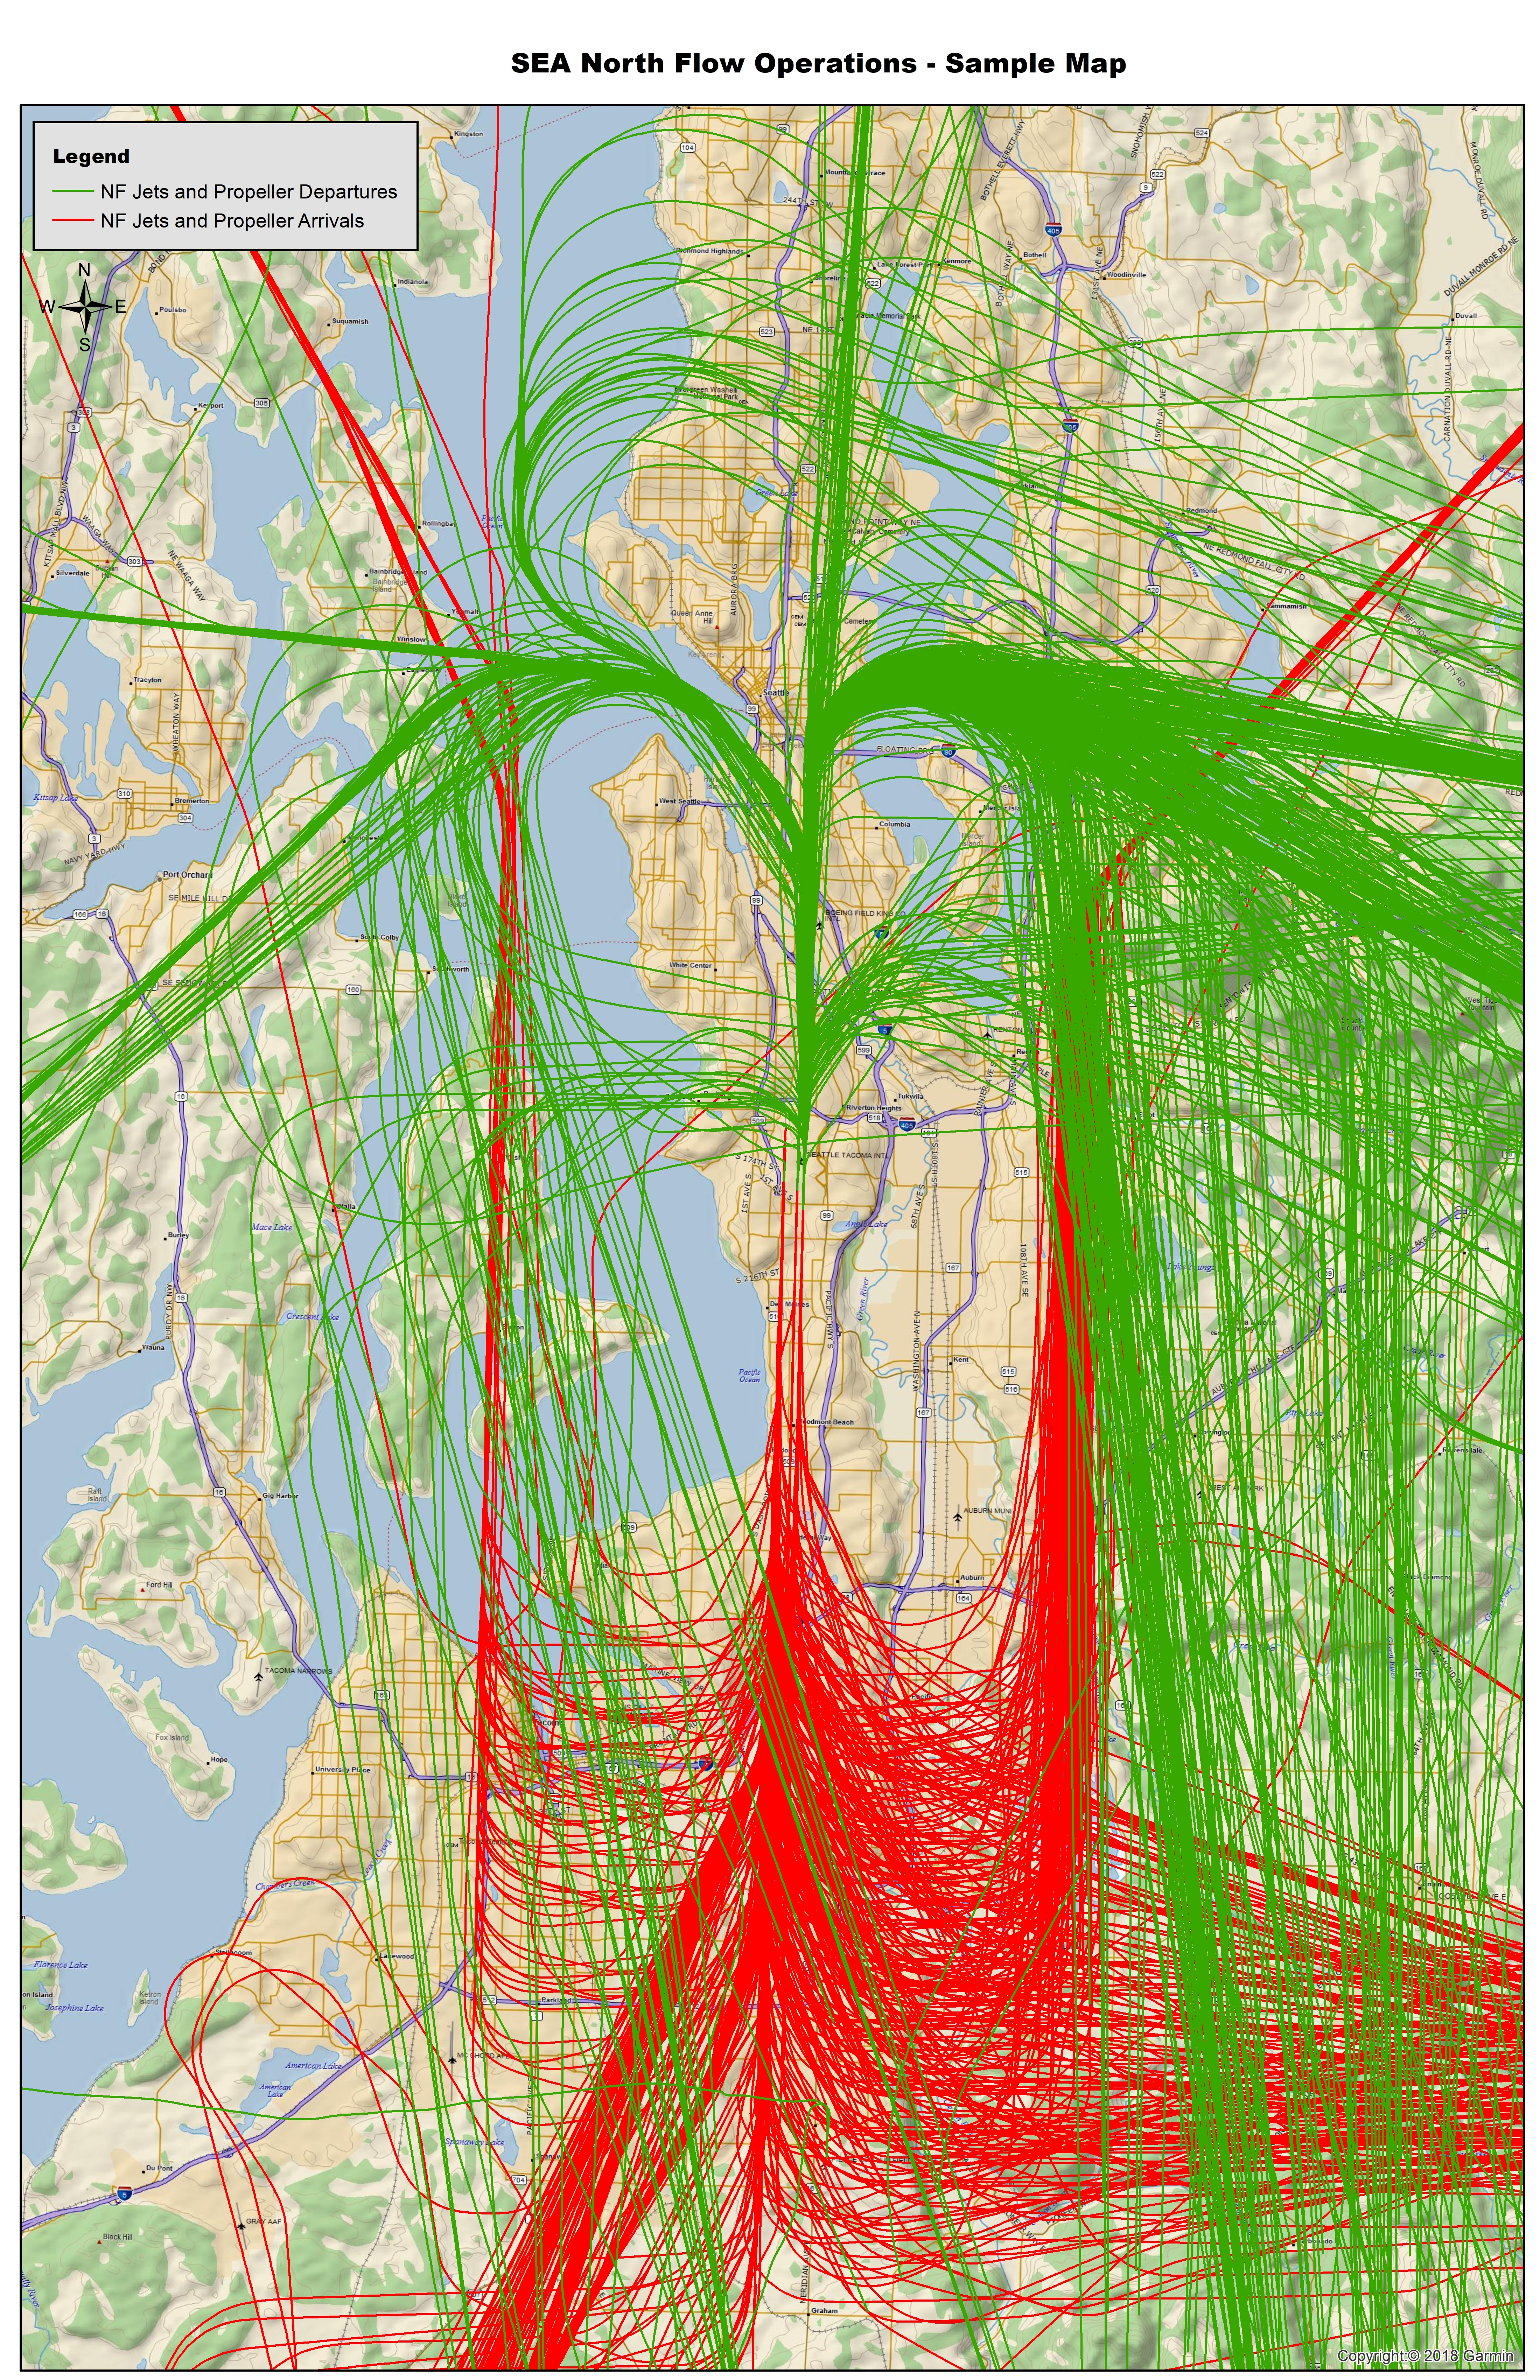 Informative map shows a sample of flight patterns over the Puget sound region